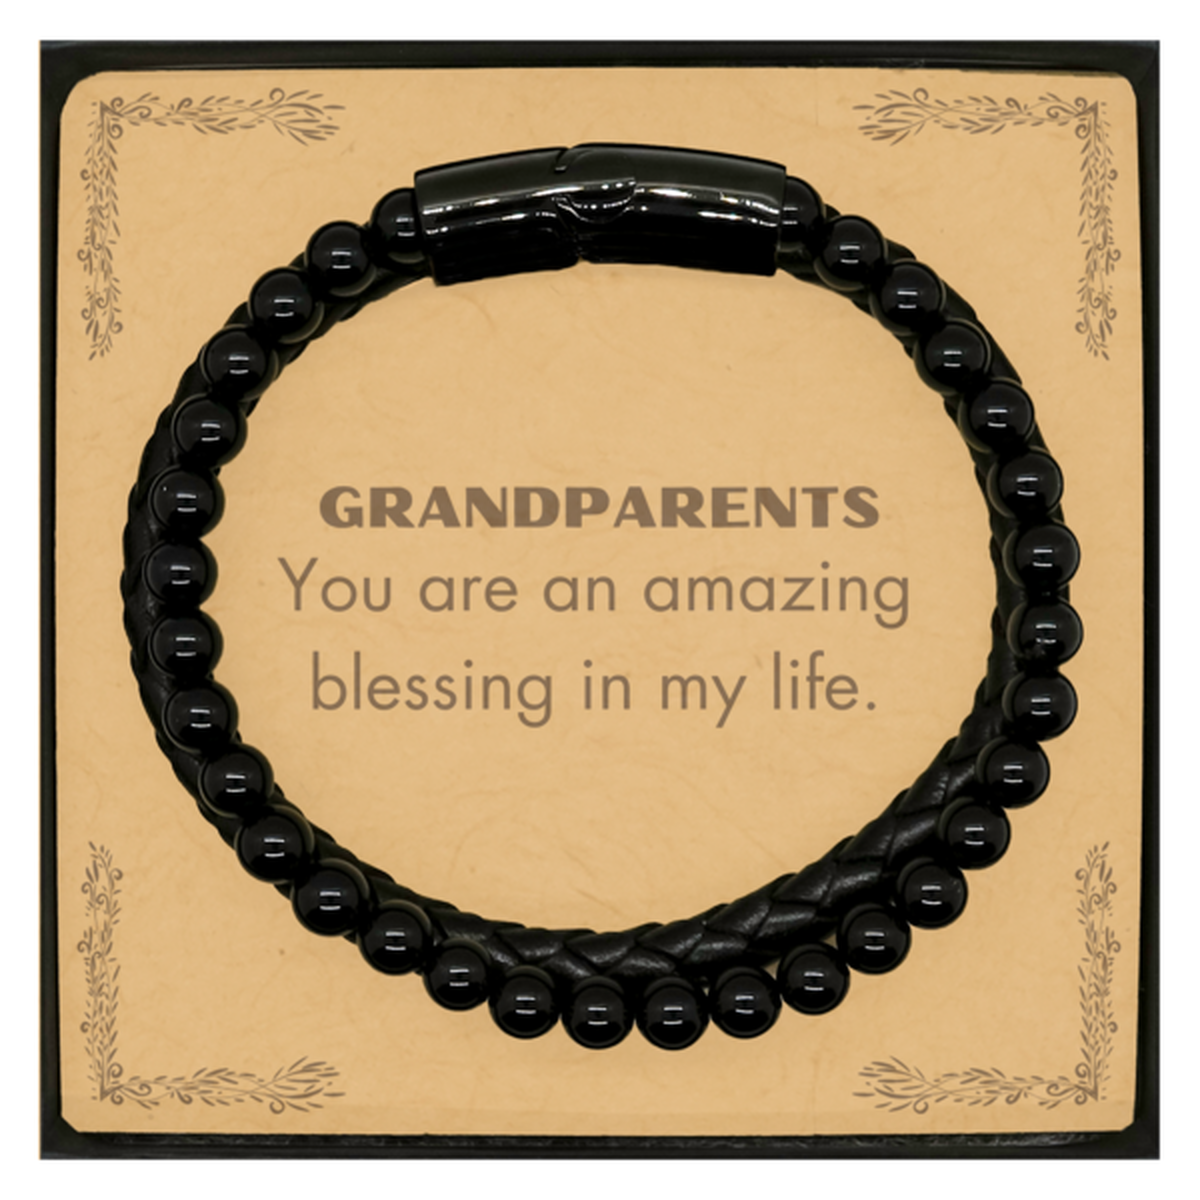 Grandparents Stone Leather Bracelets, You are an amazing blessing in my life, Thank You Gifts For Grandparents, Inspirational Birthday Christmas Unique Gifts For Grandparents